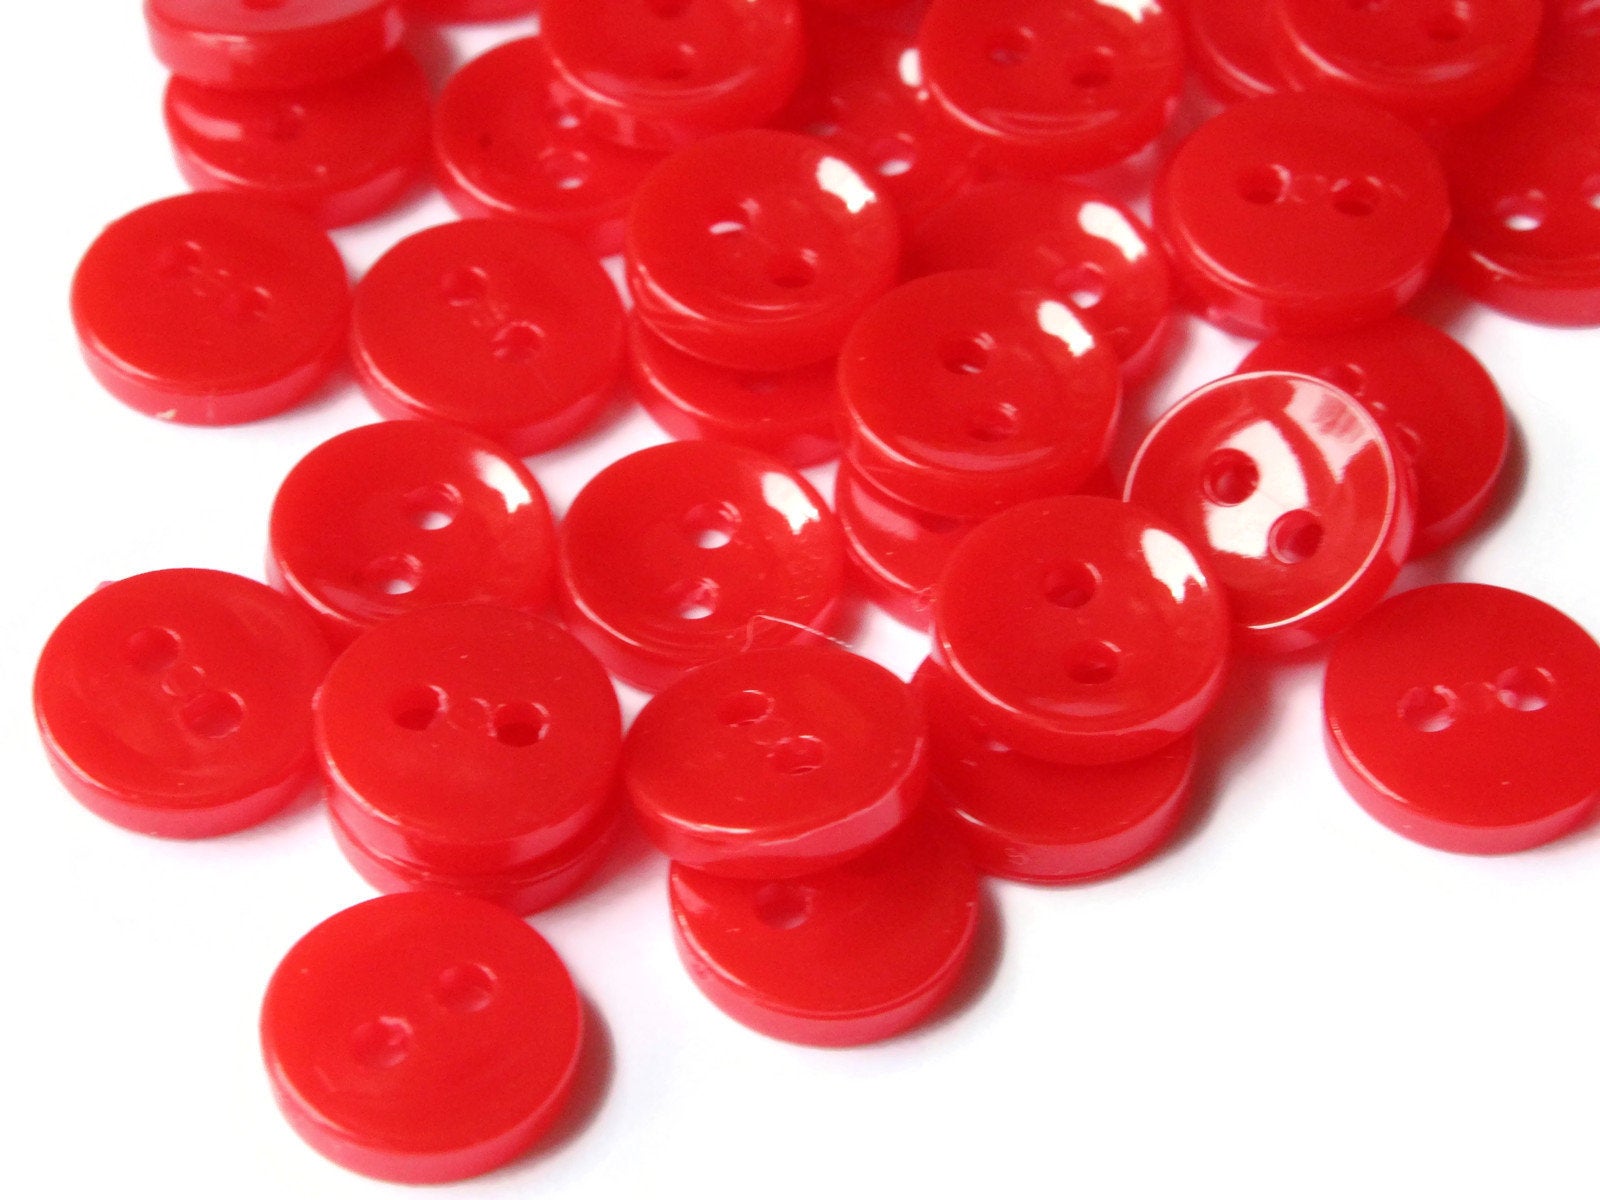 100 Pcs 2 Holes Plain Round Buttons for Crafts Sewing Findings Size 11 Mm  Mix Rainbow Tone Colors 